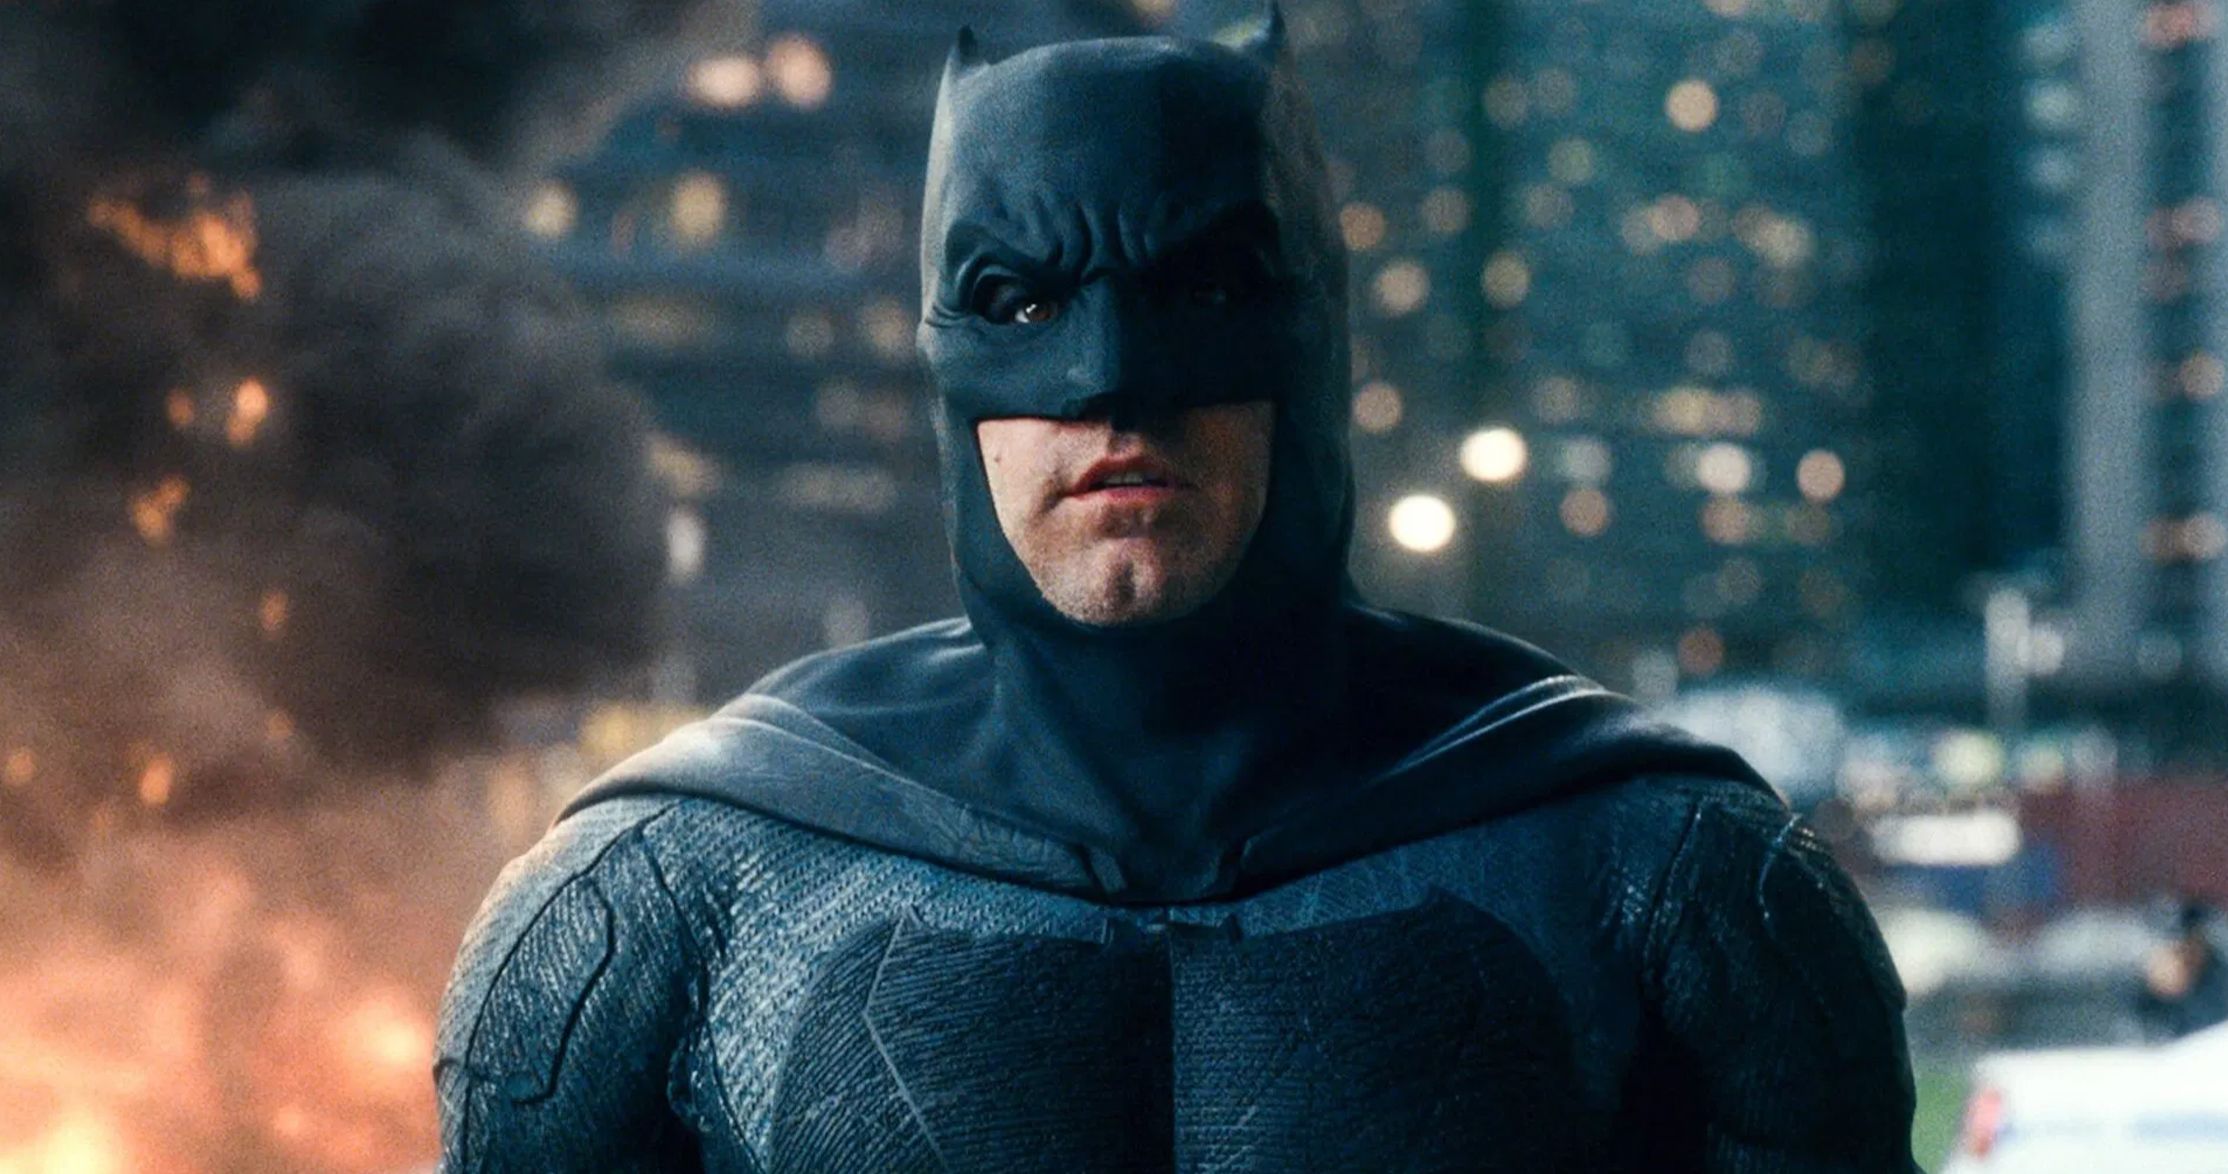 How Zack Snyder's Justice League Gave Us the Best Batman Arc We Could've  Hoped For